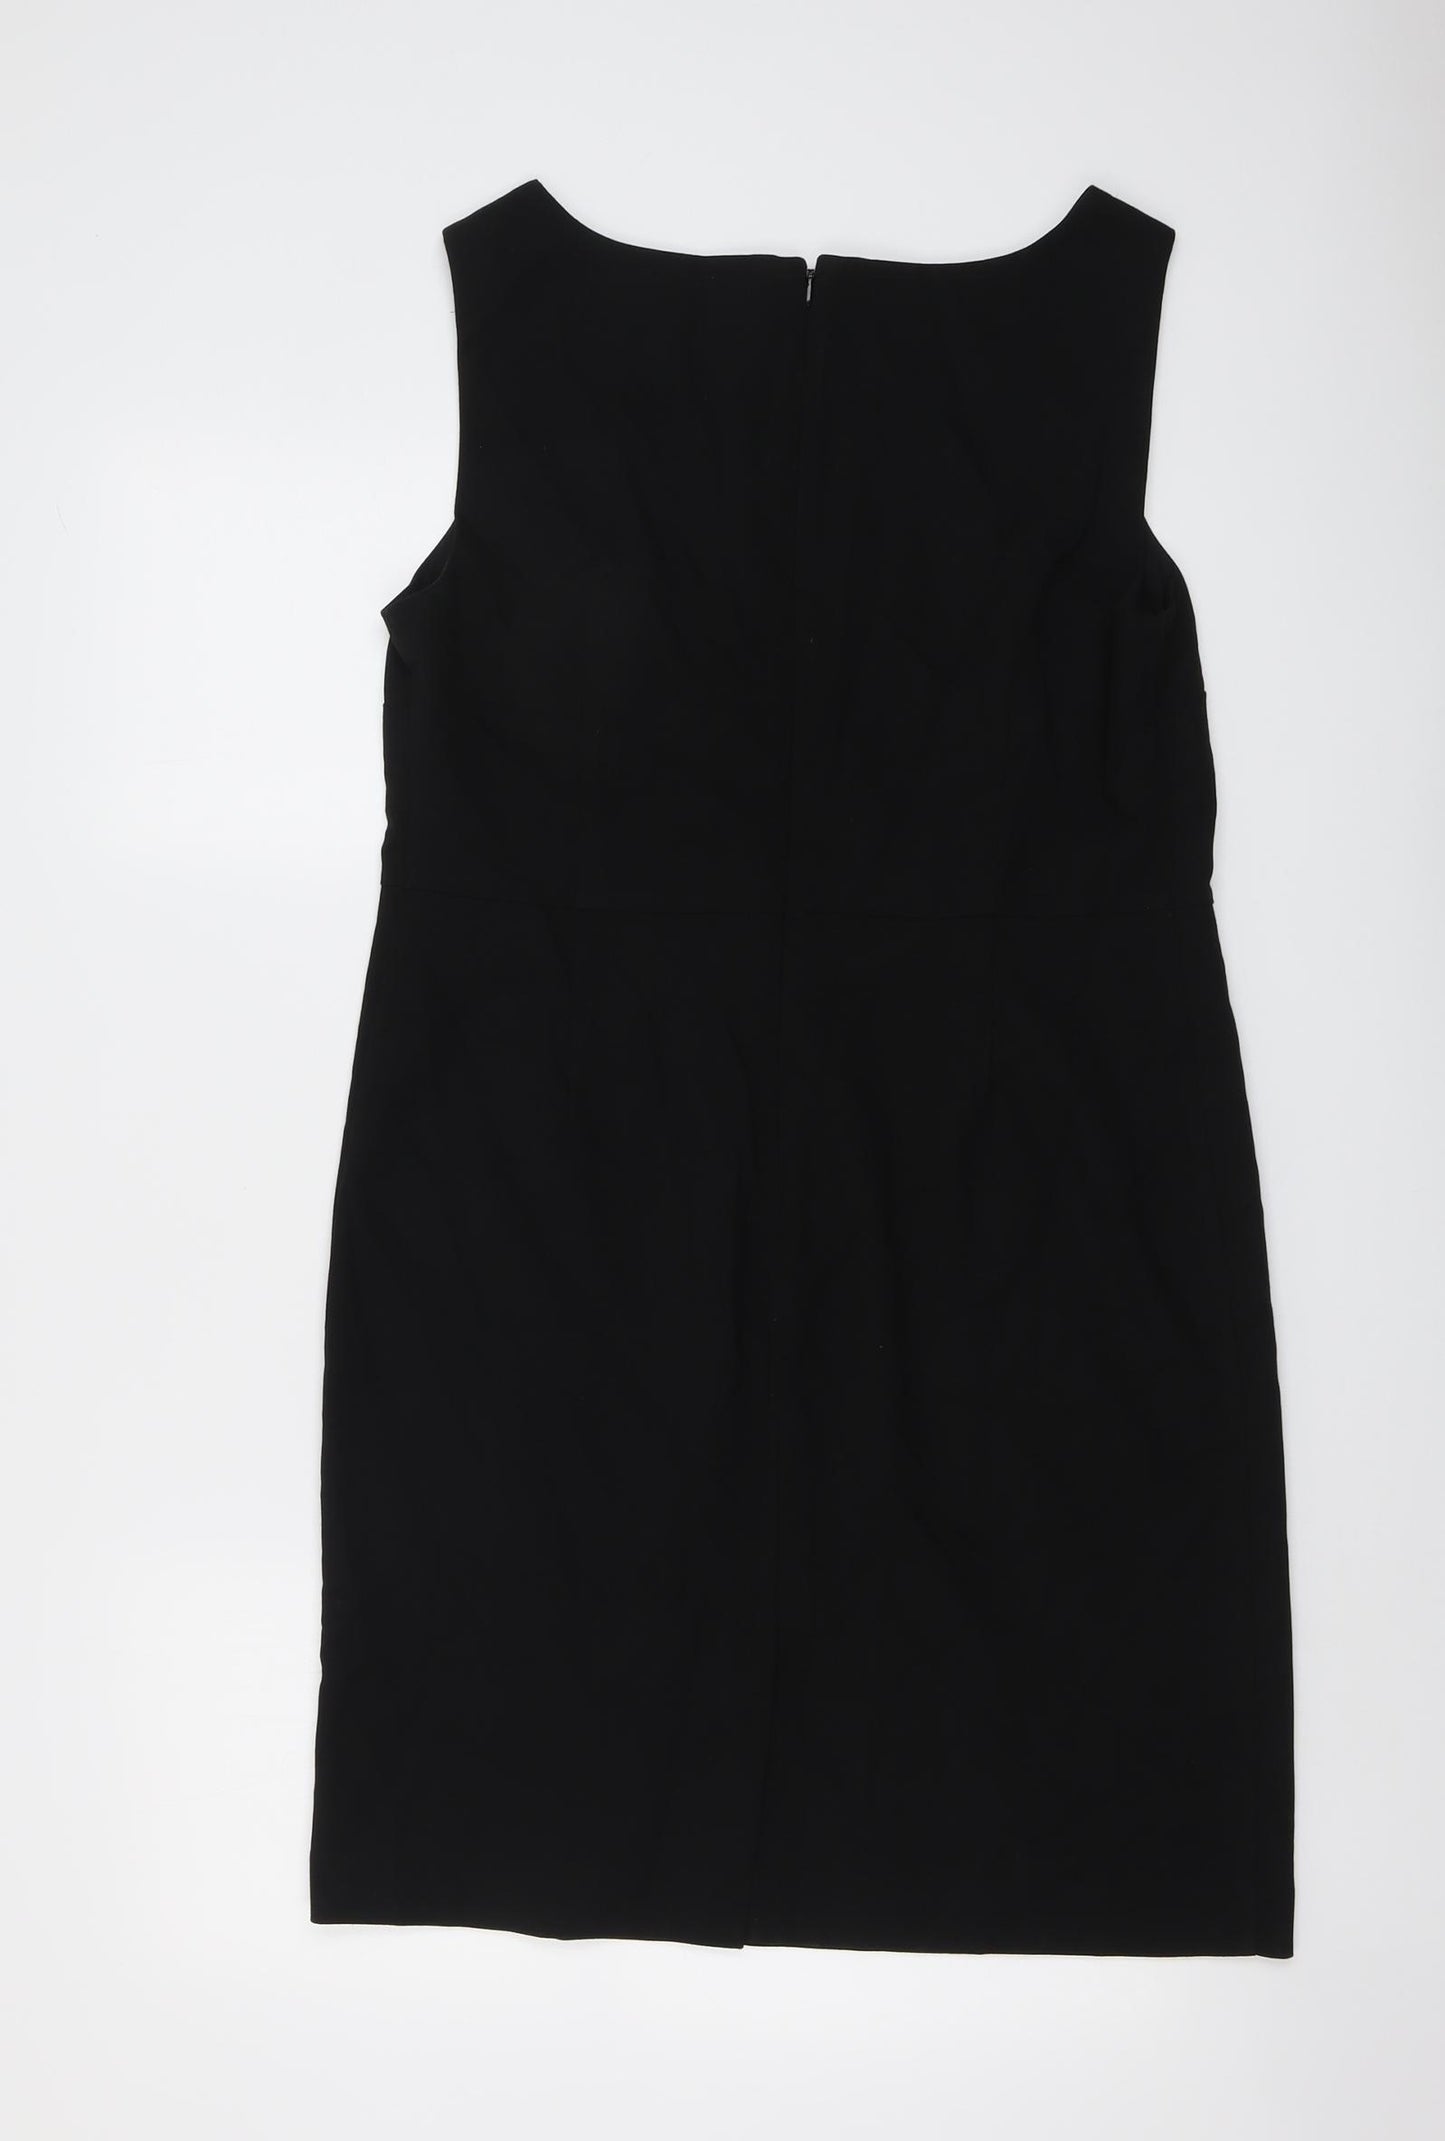 NEXT Womens Black Polyester A-Line Size 14 Boat Neck Zip